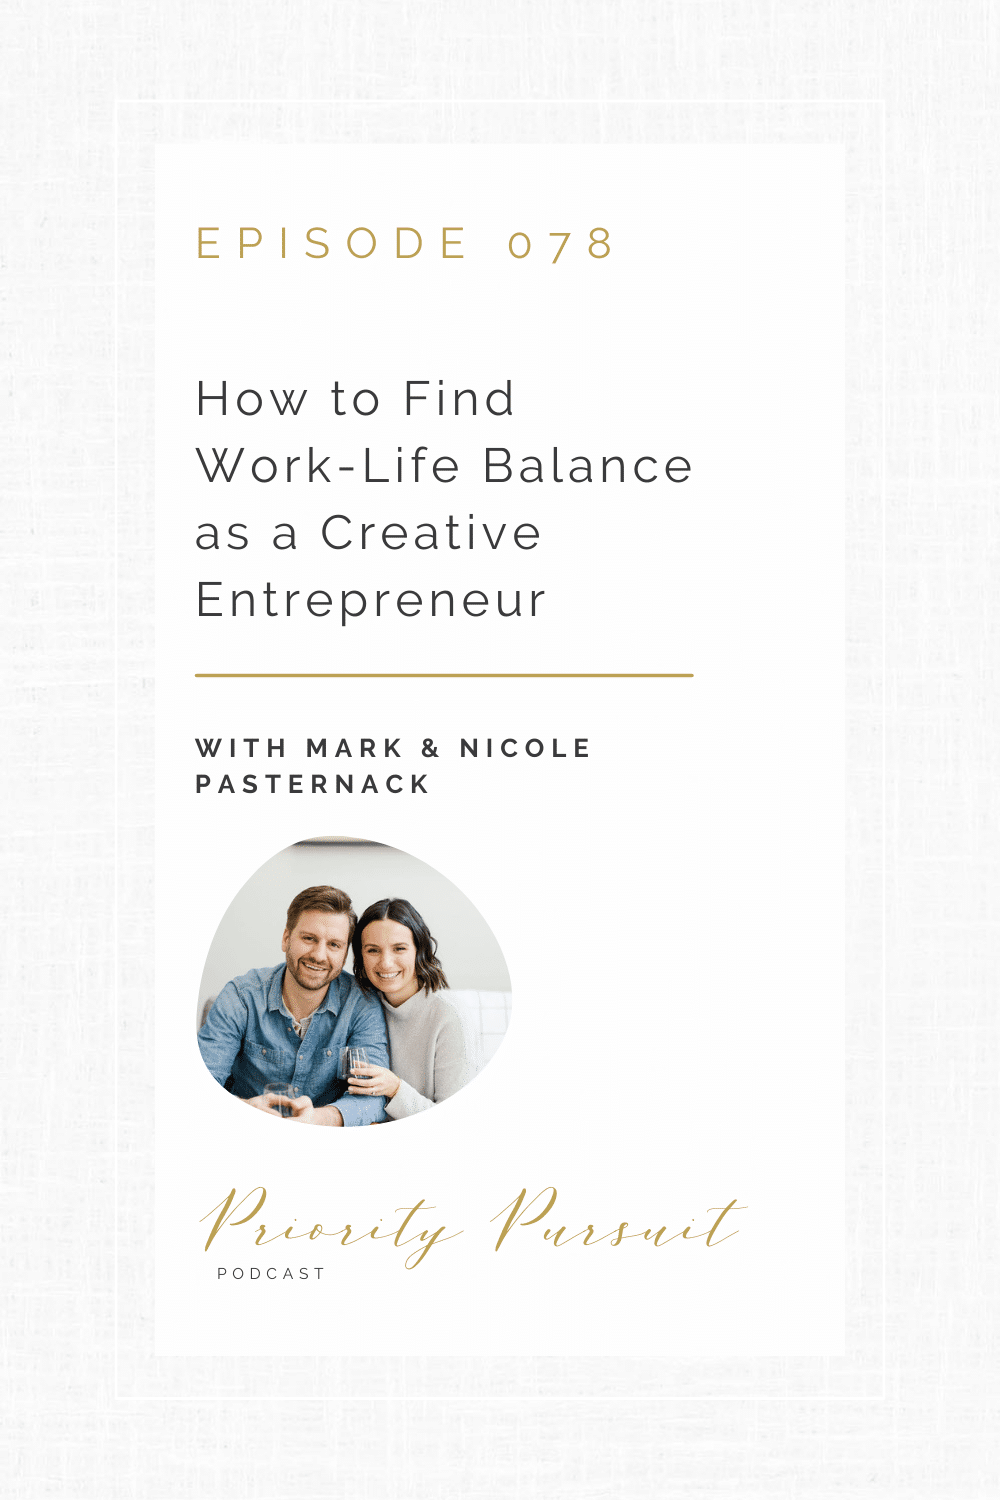 Victoria Rayburn, Mark Pasternack, and Nicole Pasternack discuss how you can find work-life balance as a creative entrepreneur.